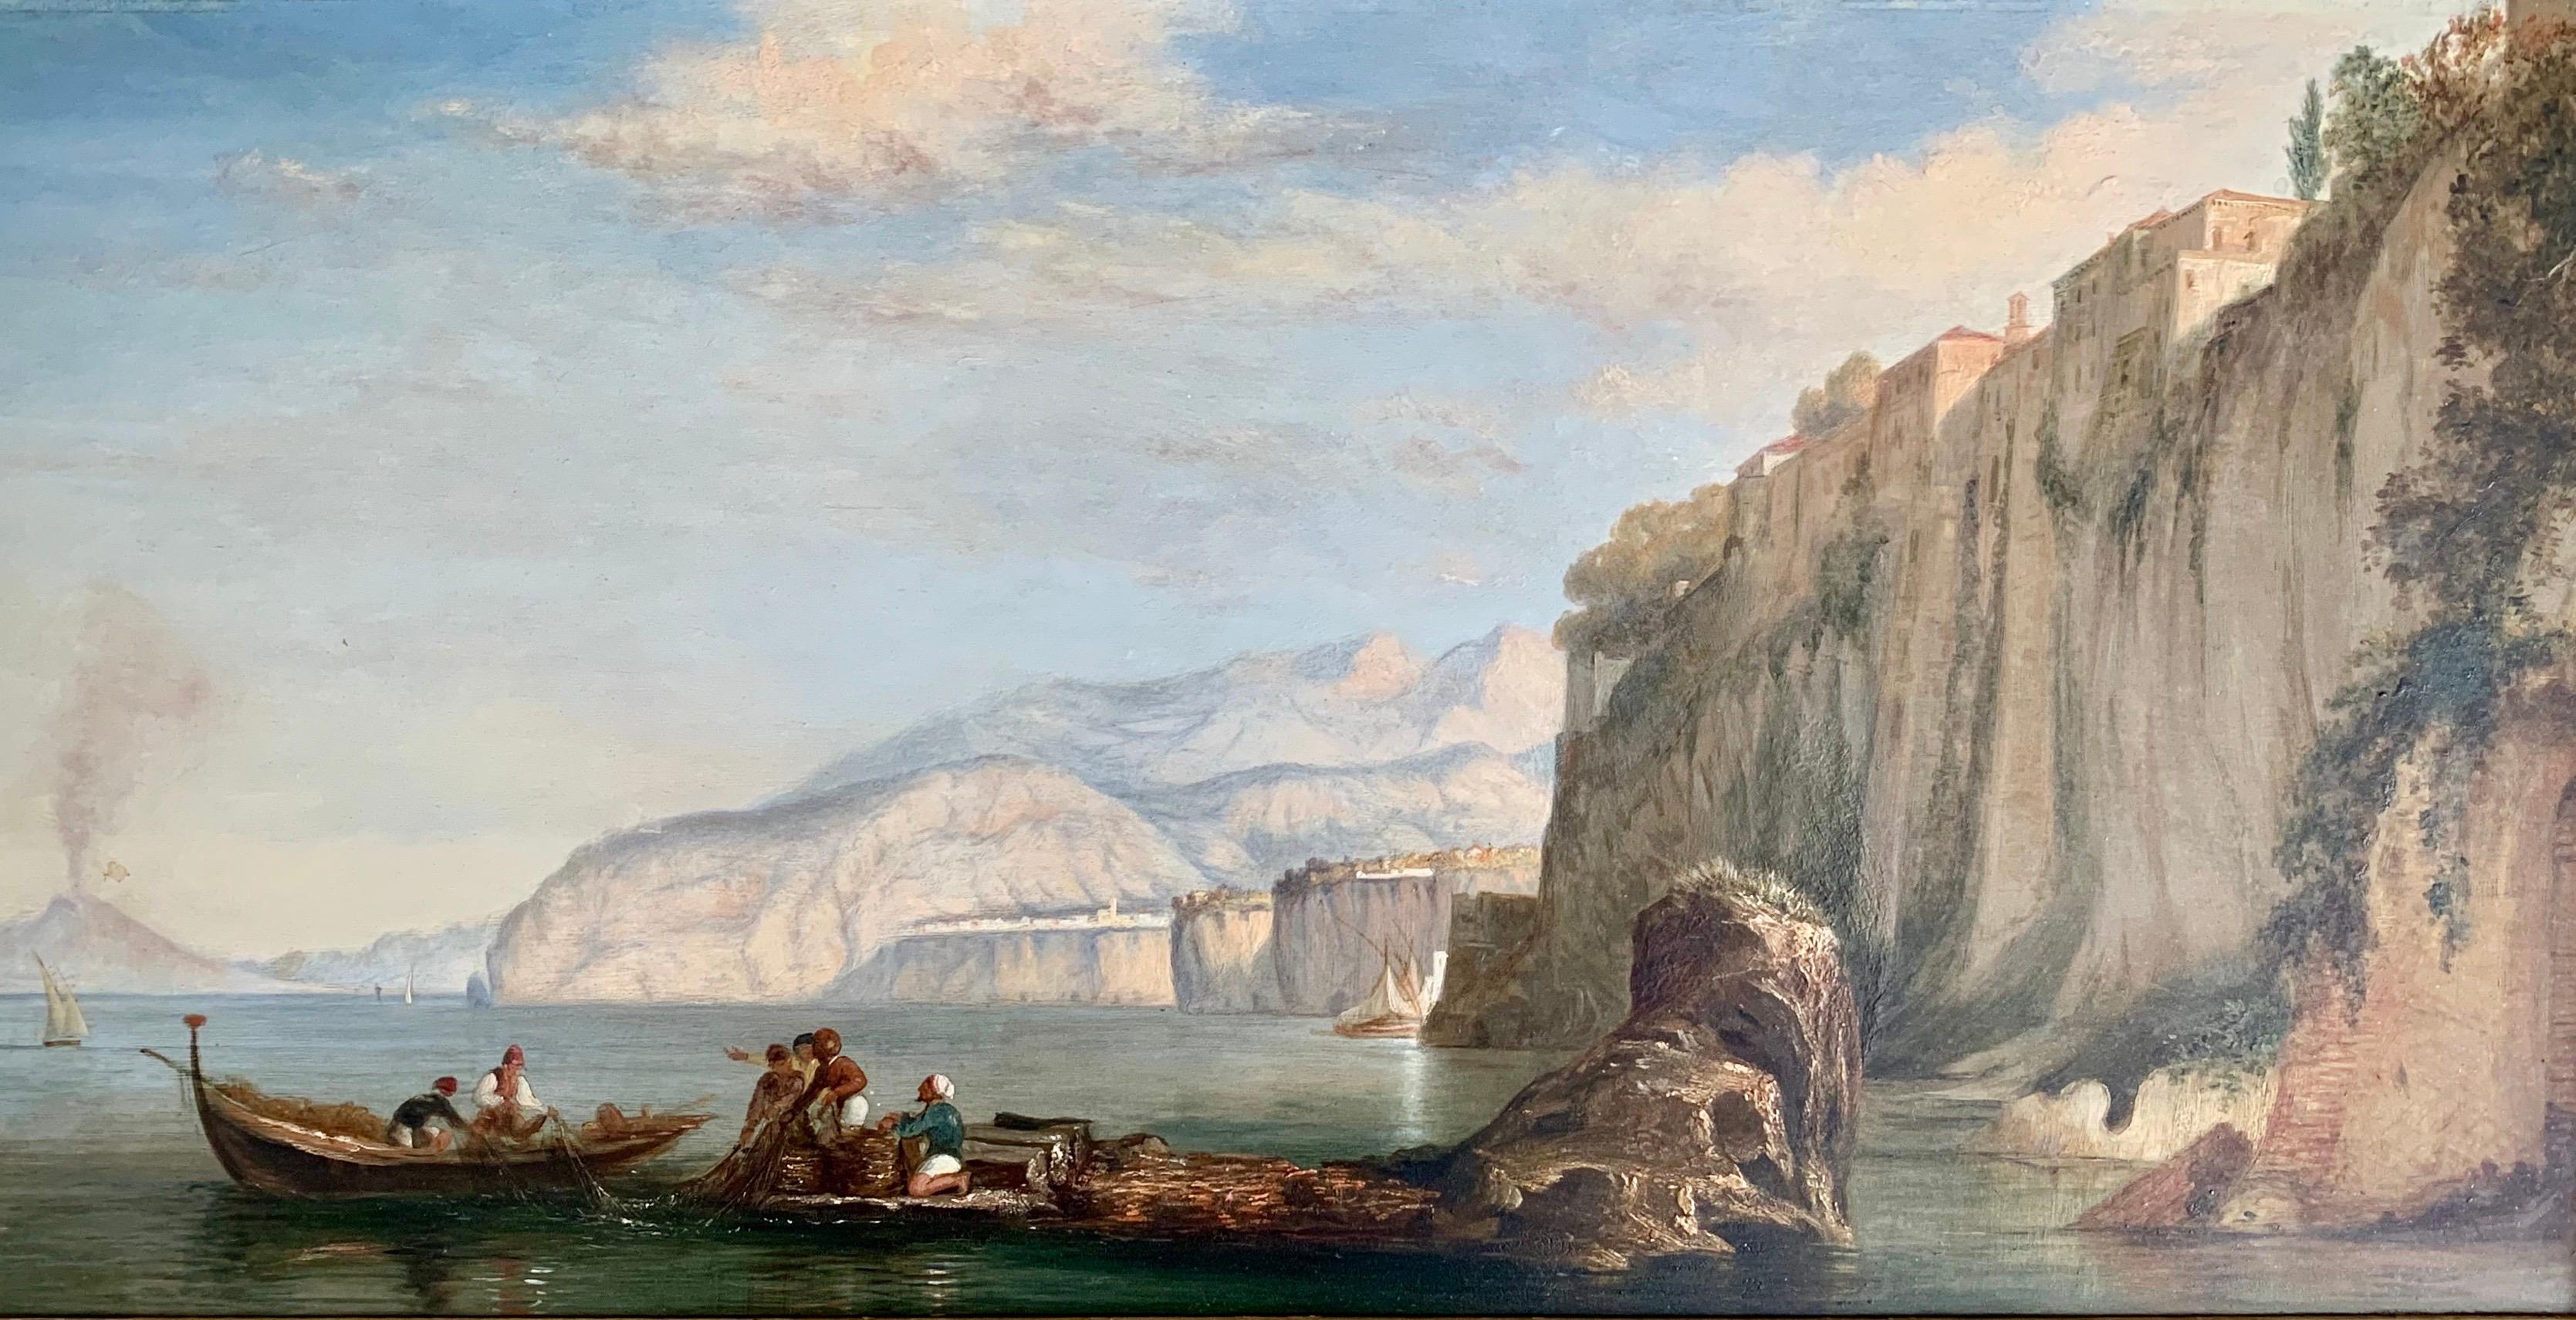 A nice early pair of oil paintings by James Bridges (British 1802-1865) Views of the Bay of Naples
Superb quality pair of Oils Titled Views of the Bay of Naples.
These are nicely presented in their original two toned gilt wood frames.
Both are